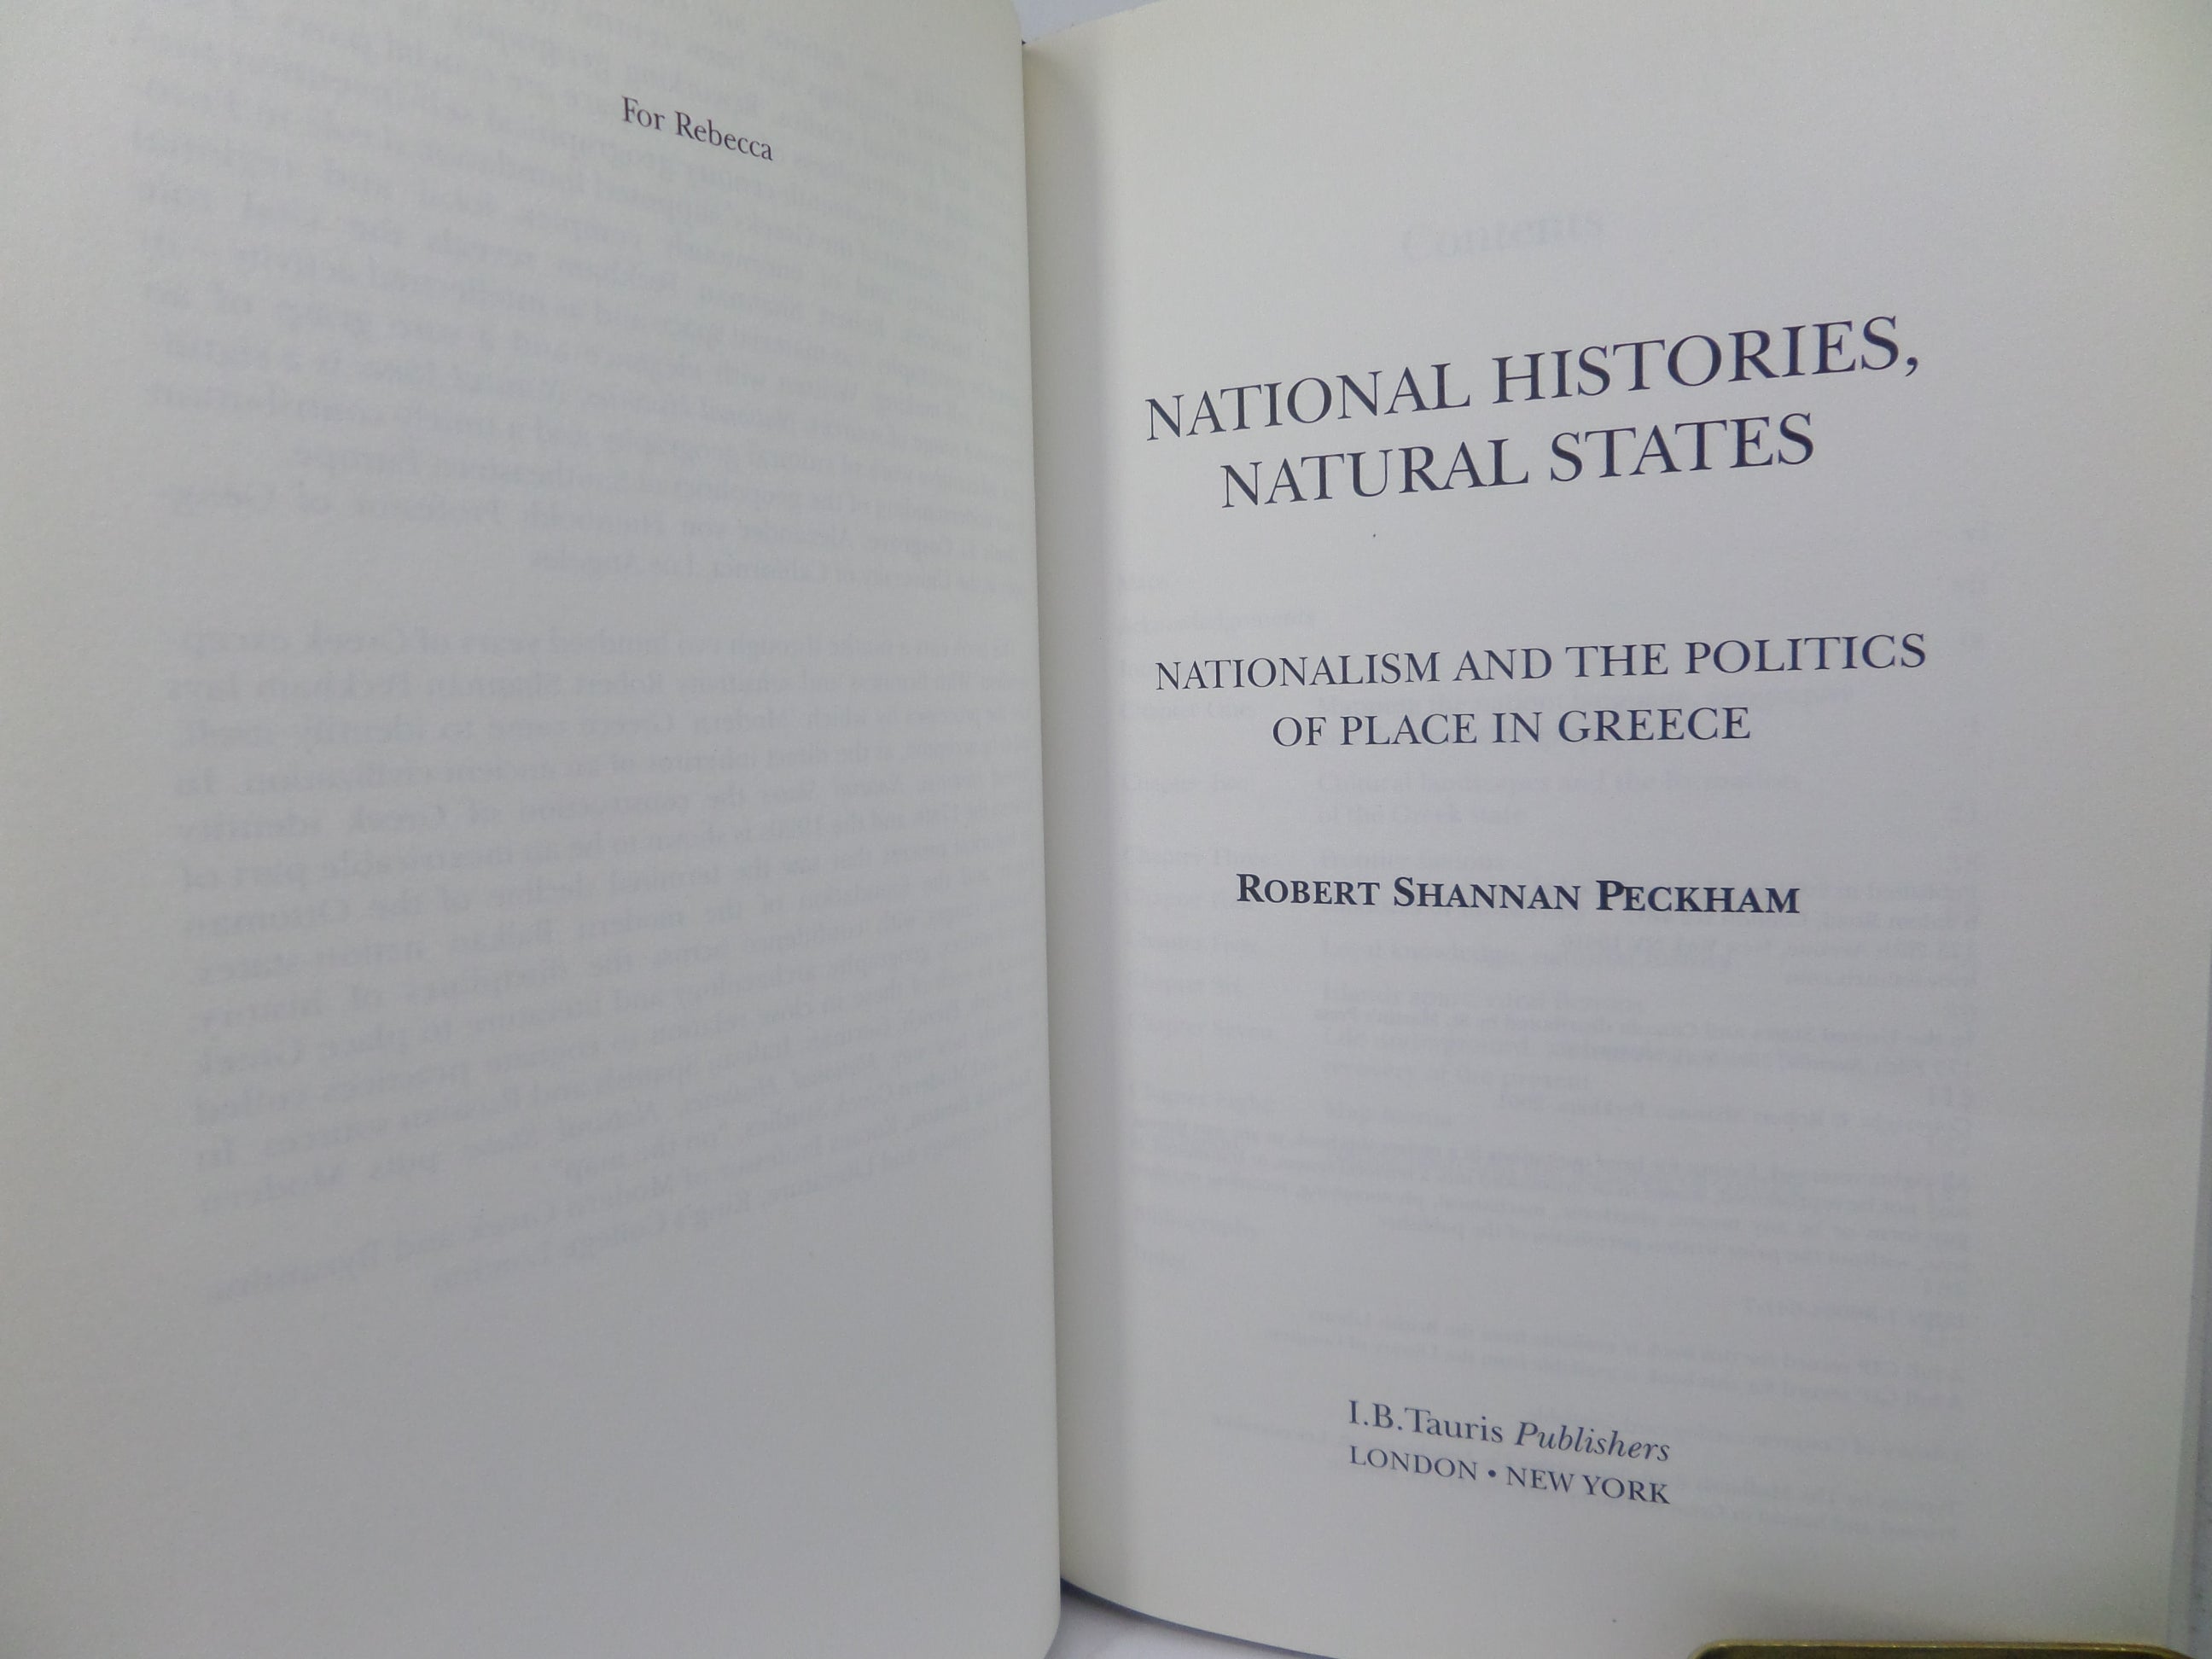 NATIONAL HISTORIES, NATURAL STATES - GREECE BY ROBERT PECKHAM 2001 HARDCOVER